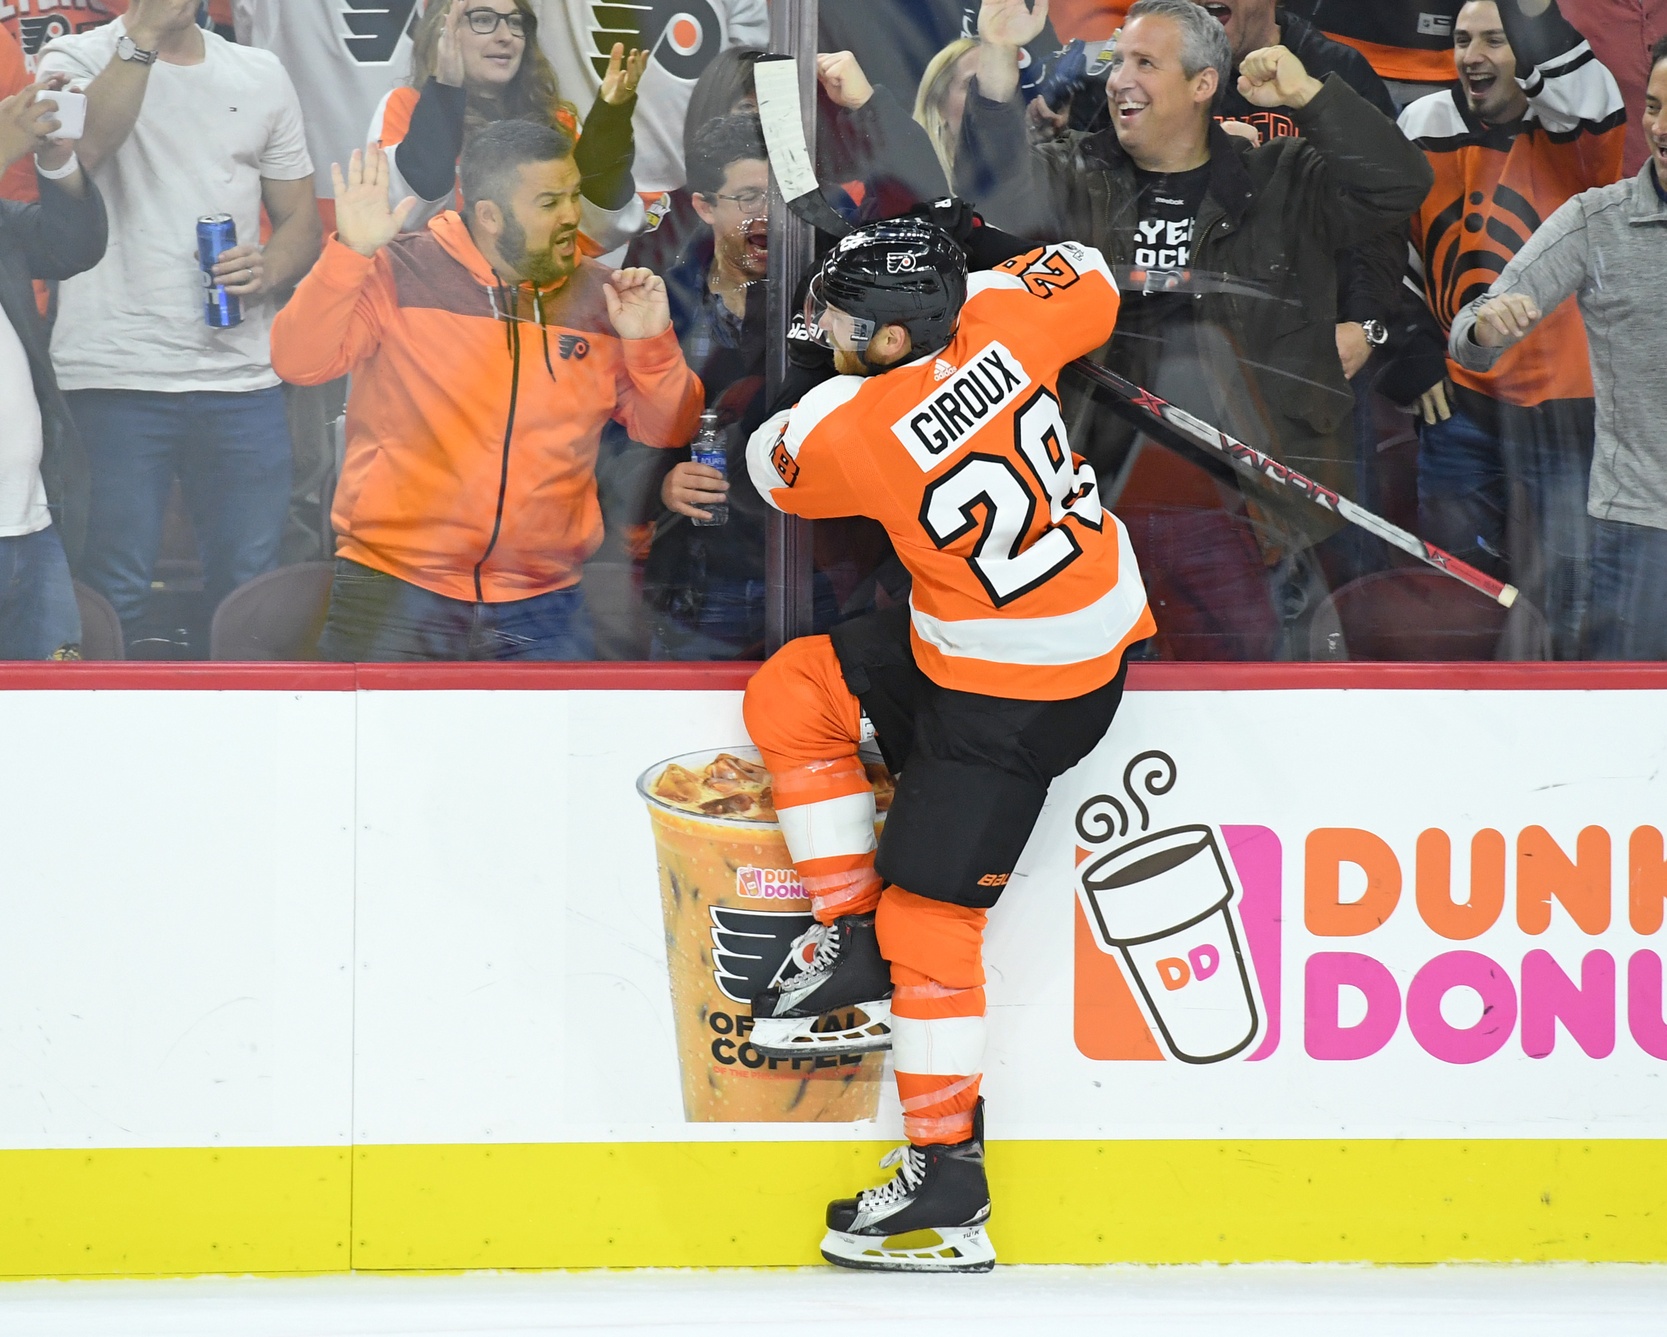 Limousine Riding Son of a Gun! Seven Takeaways from Flyers 5, Panthers 1